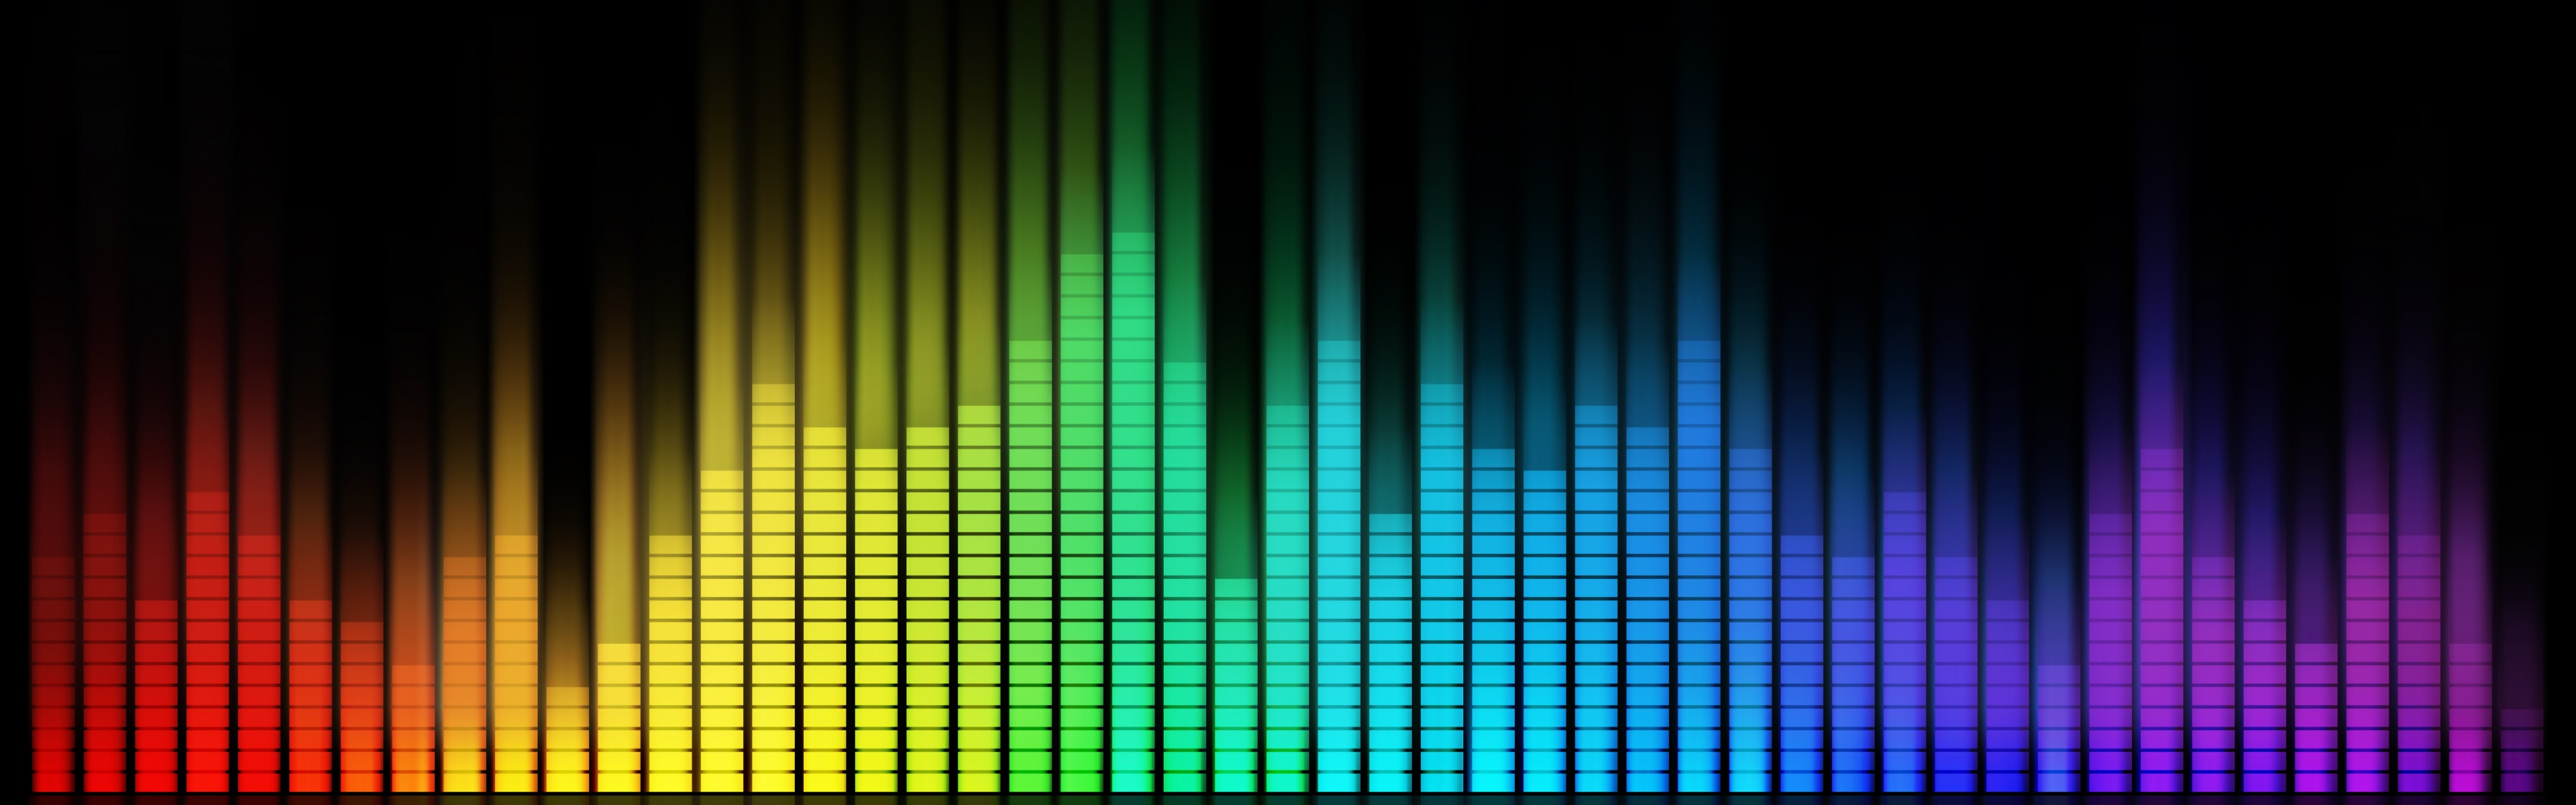 Music Equalizer Wallpaper On